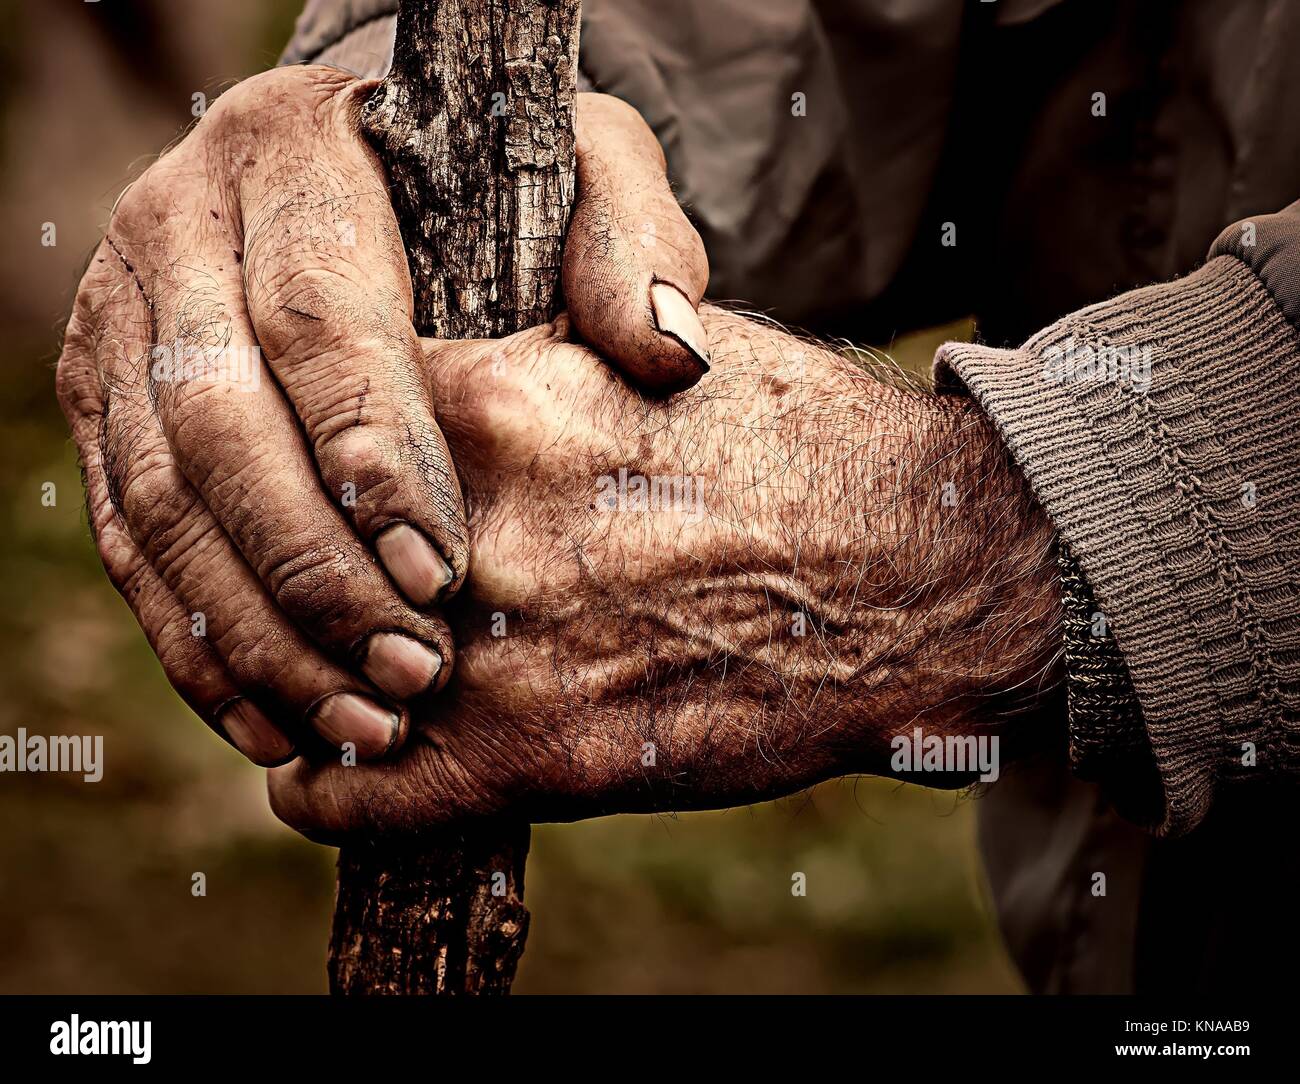 Dramatic photo of an elderly man holding a staff in his hands. Stock Photo